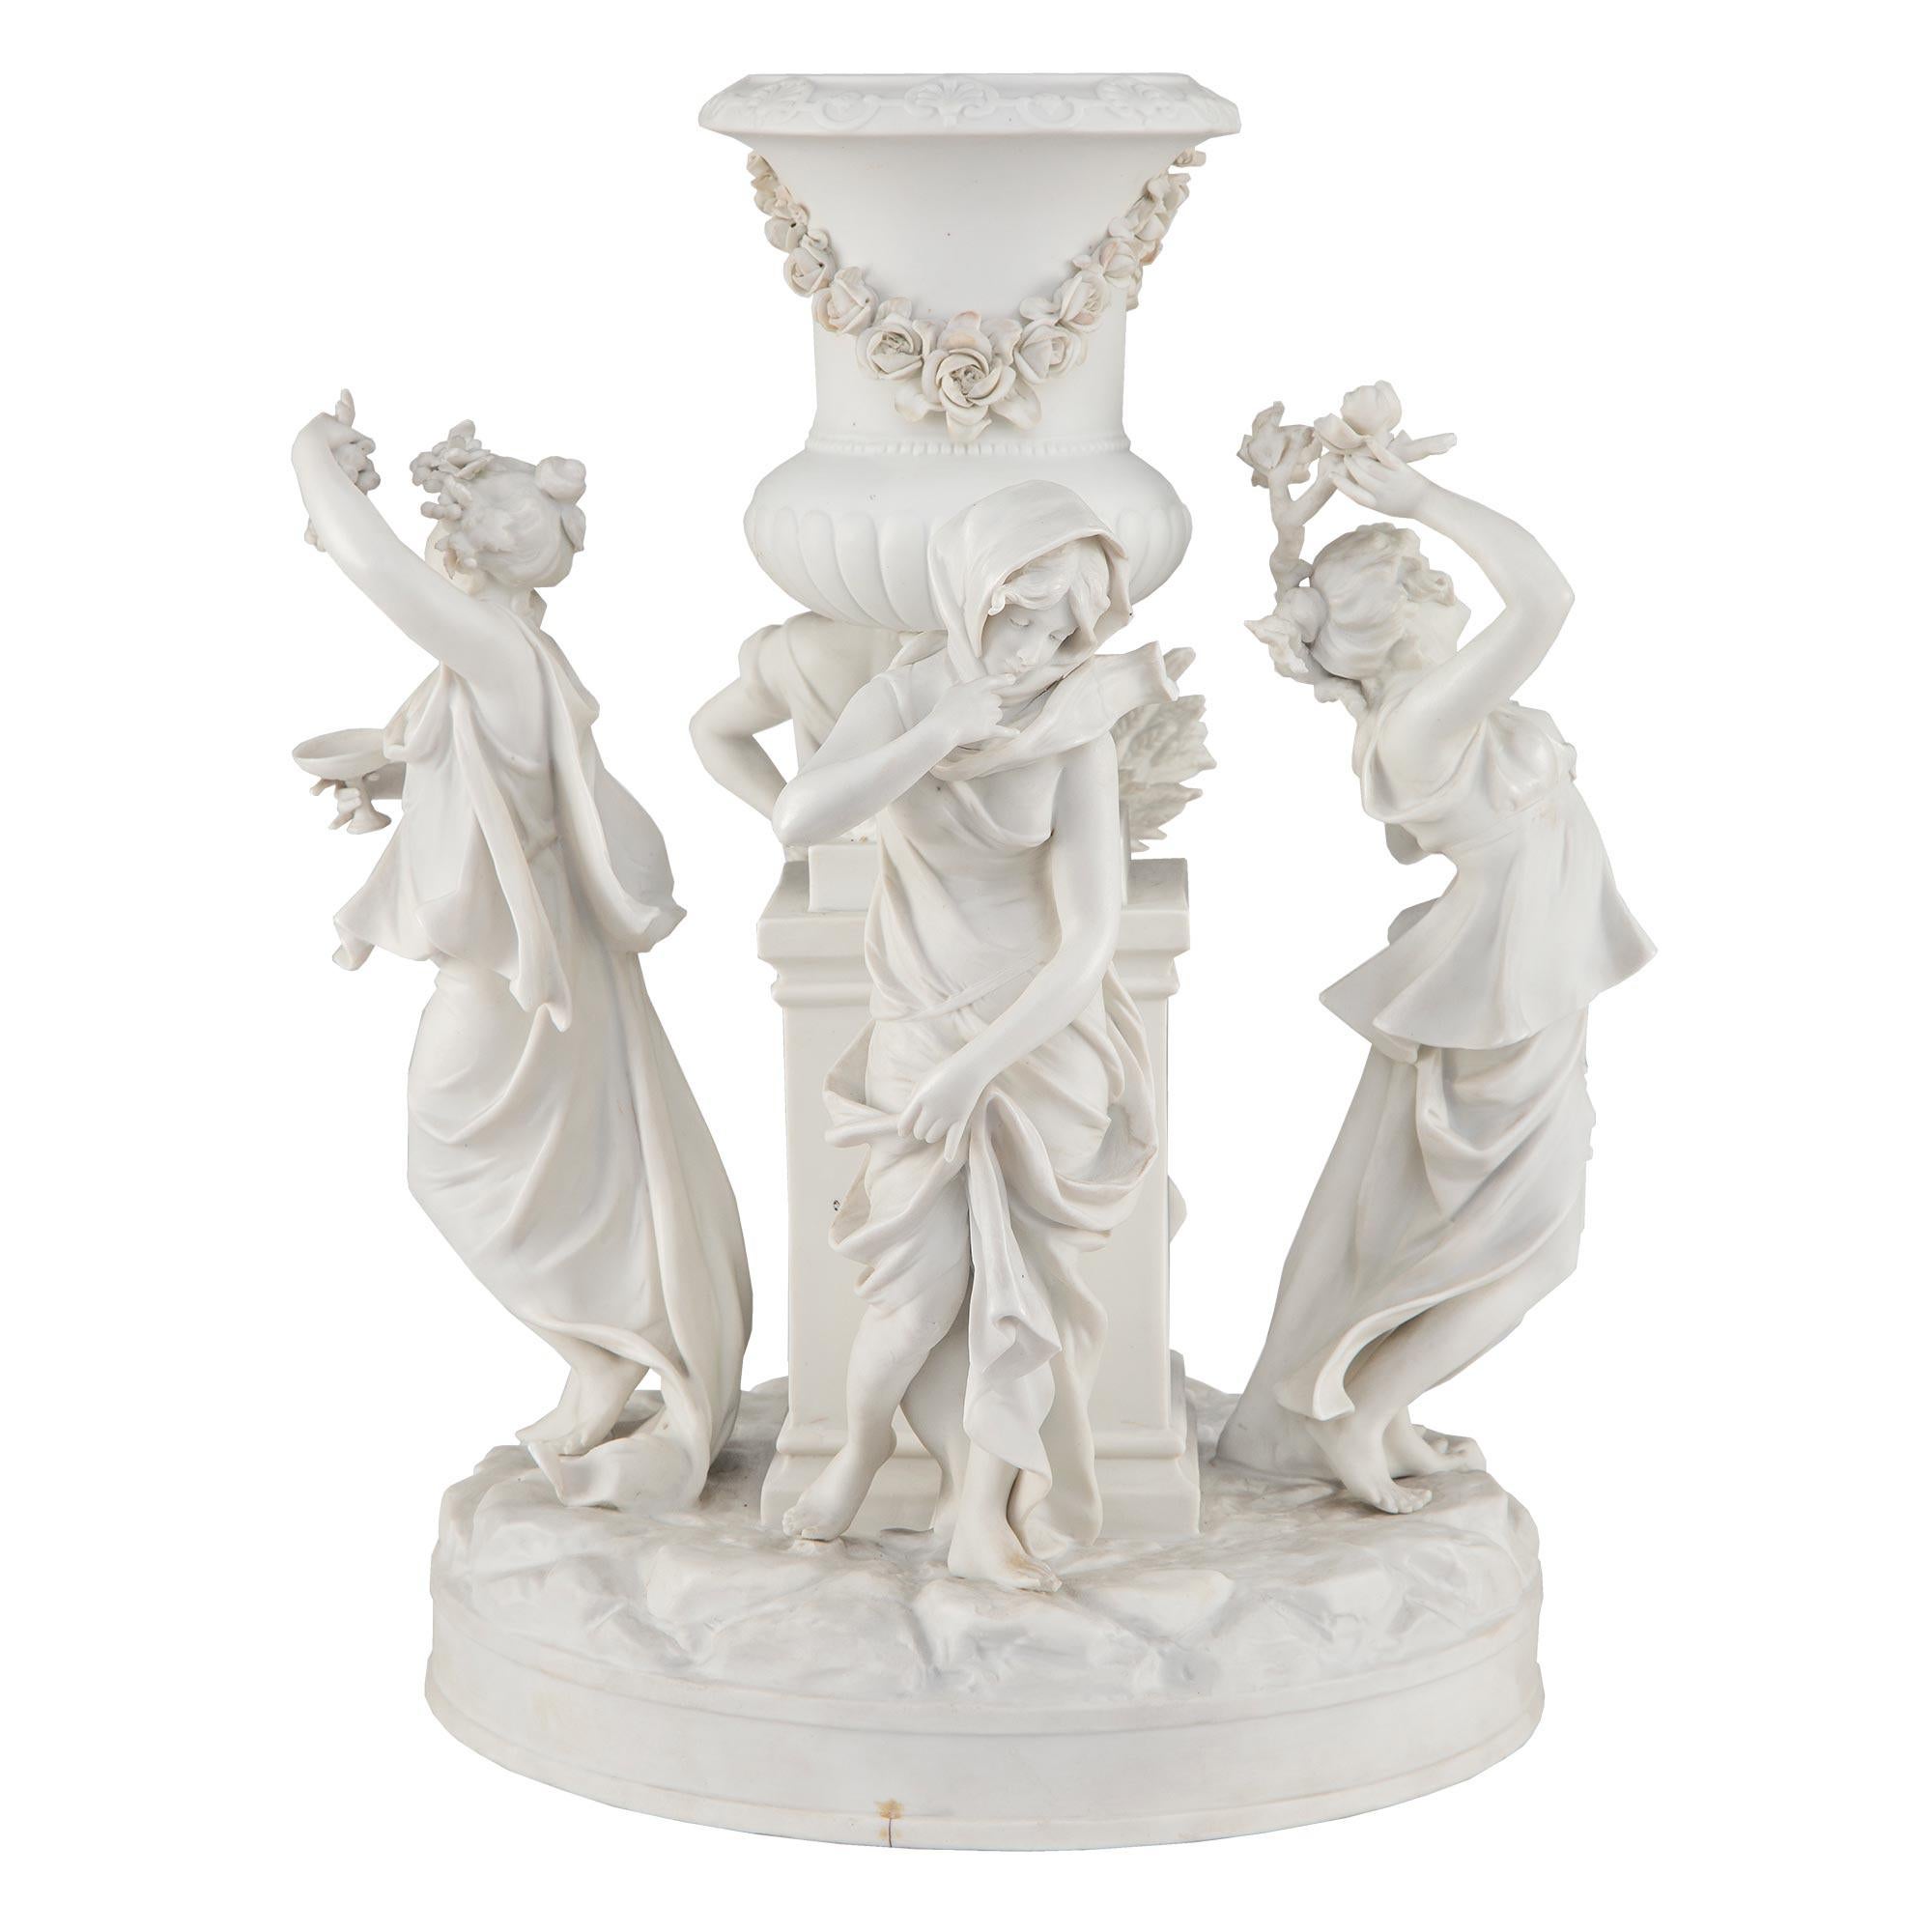 A stunning and wonderfully executed French 19th century Louis XVI st. Biscuit de Sèvres porcelain centerpiece. The most elegant centerpiece is raised by a circular base with a ground-like design where four stunning maidens depicting the four seasons